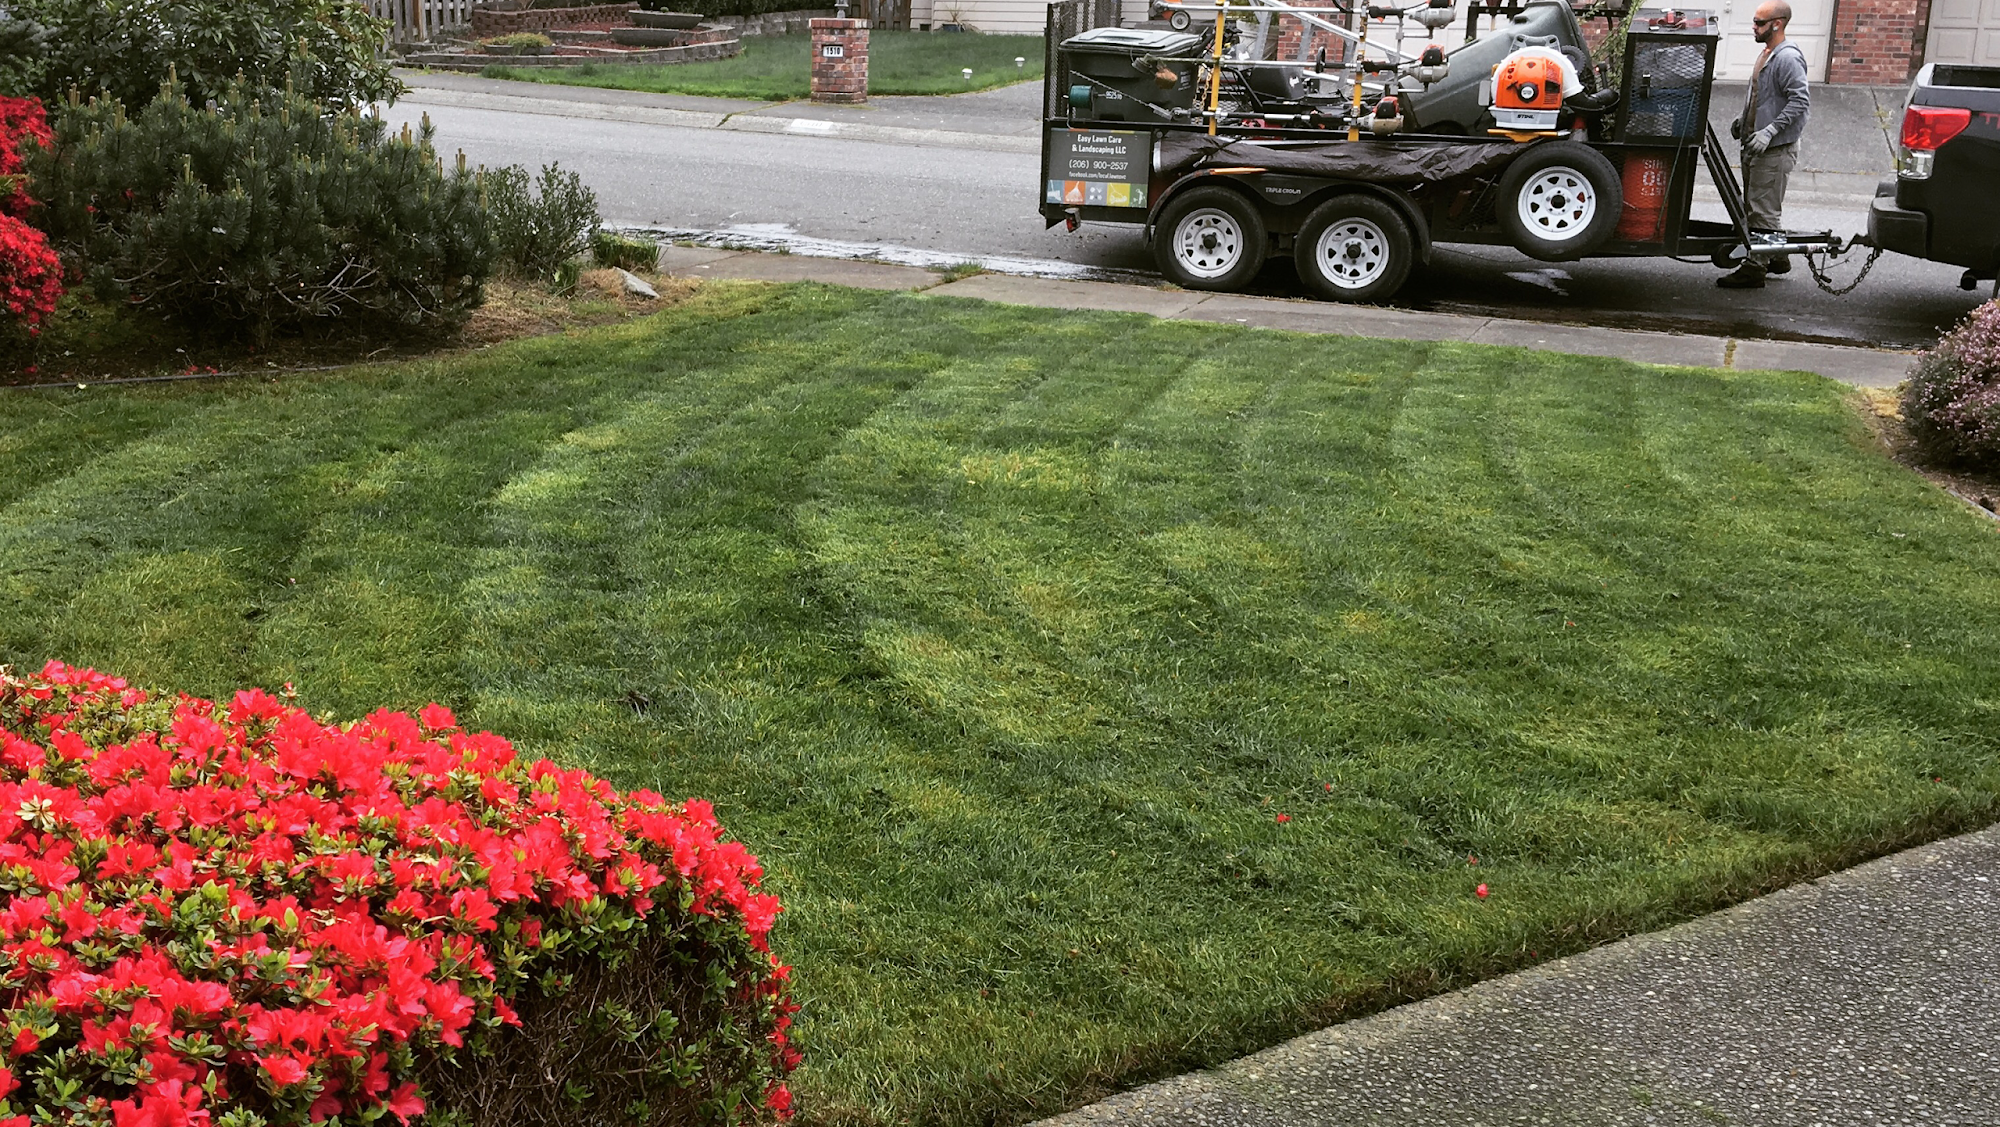 Easy Lawn Care & Landscaping LLC